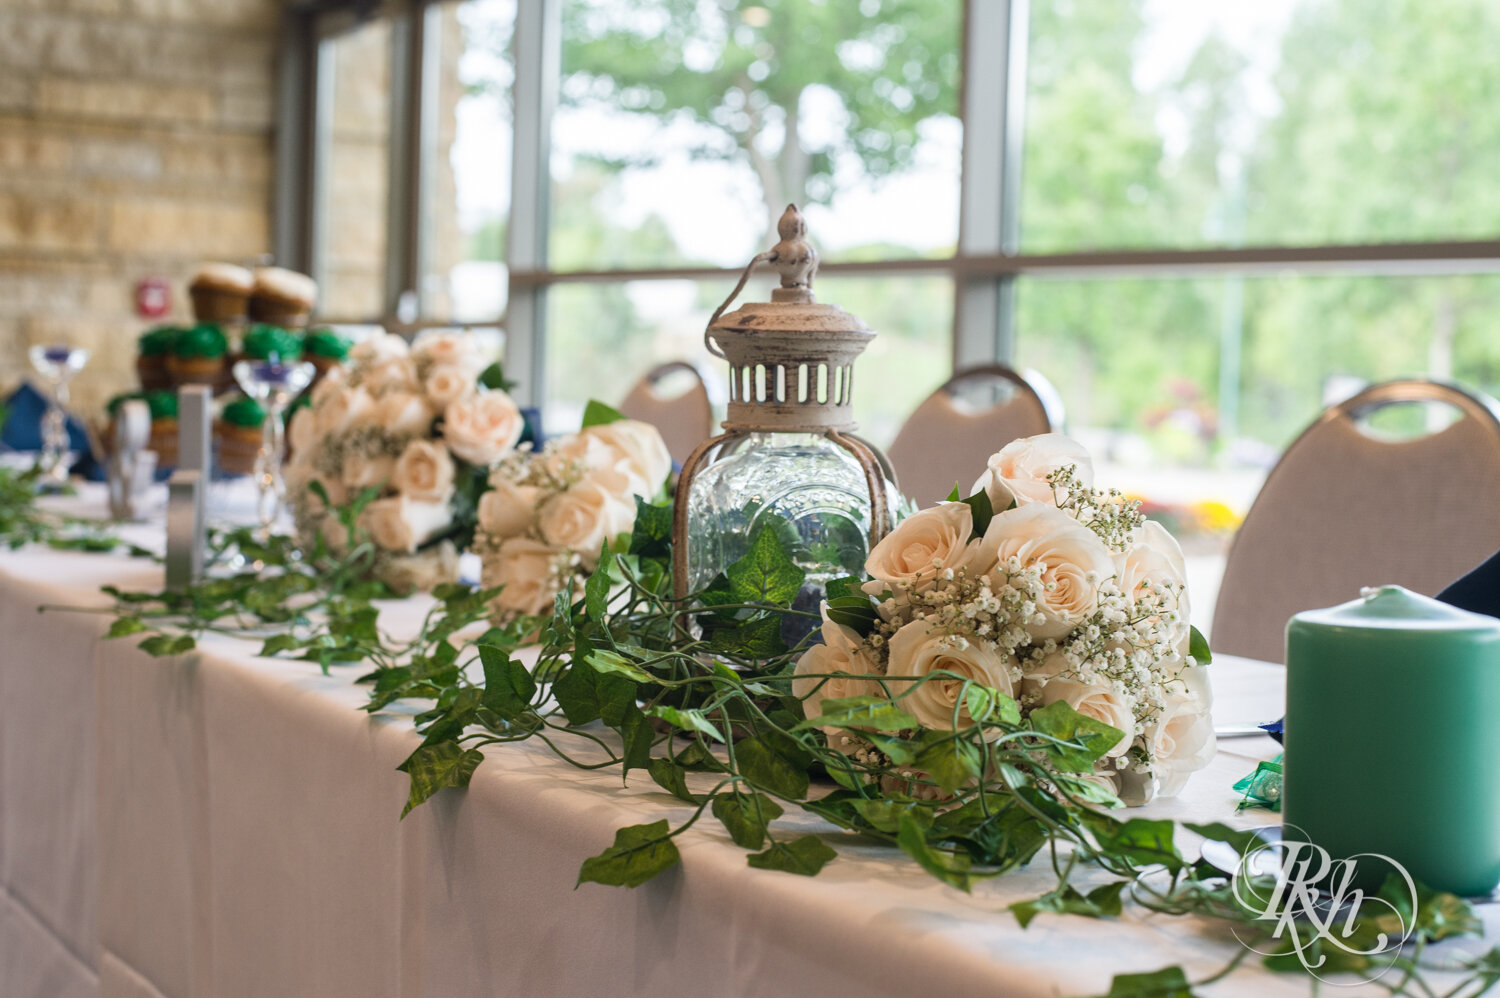 Wedding reception with green and blue accents at Eagan Community Center in Eagan, Minnesota.